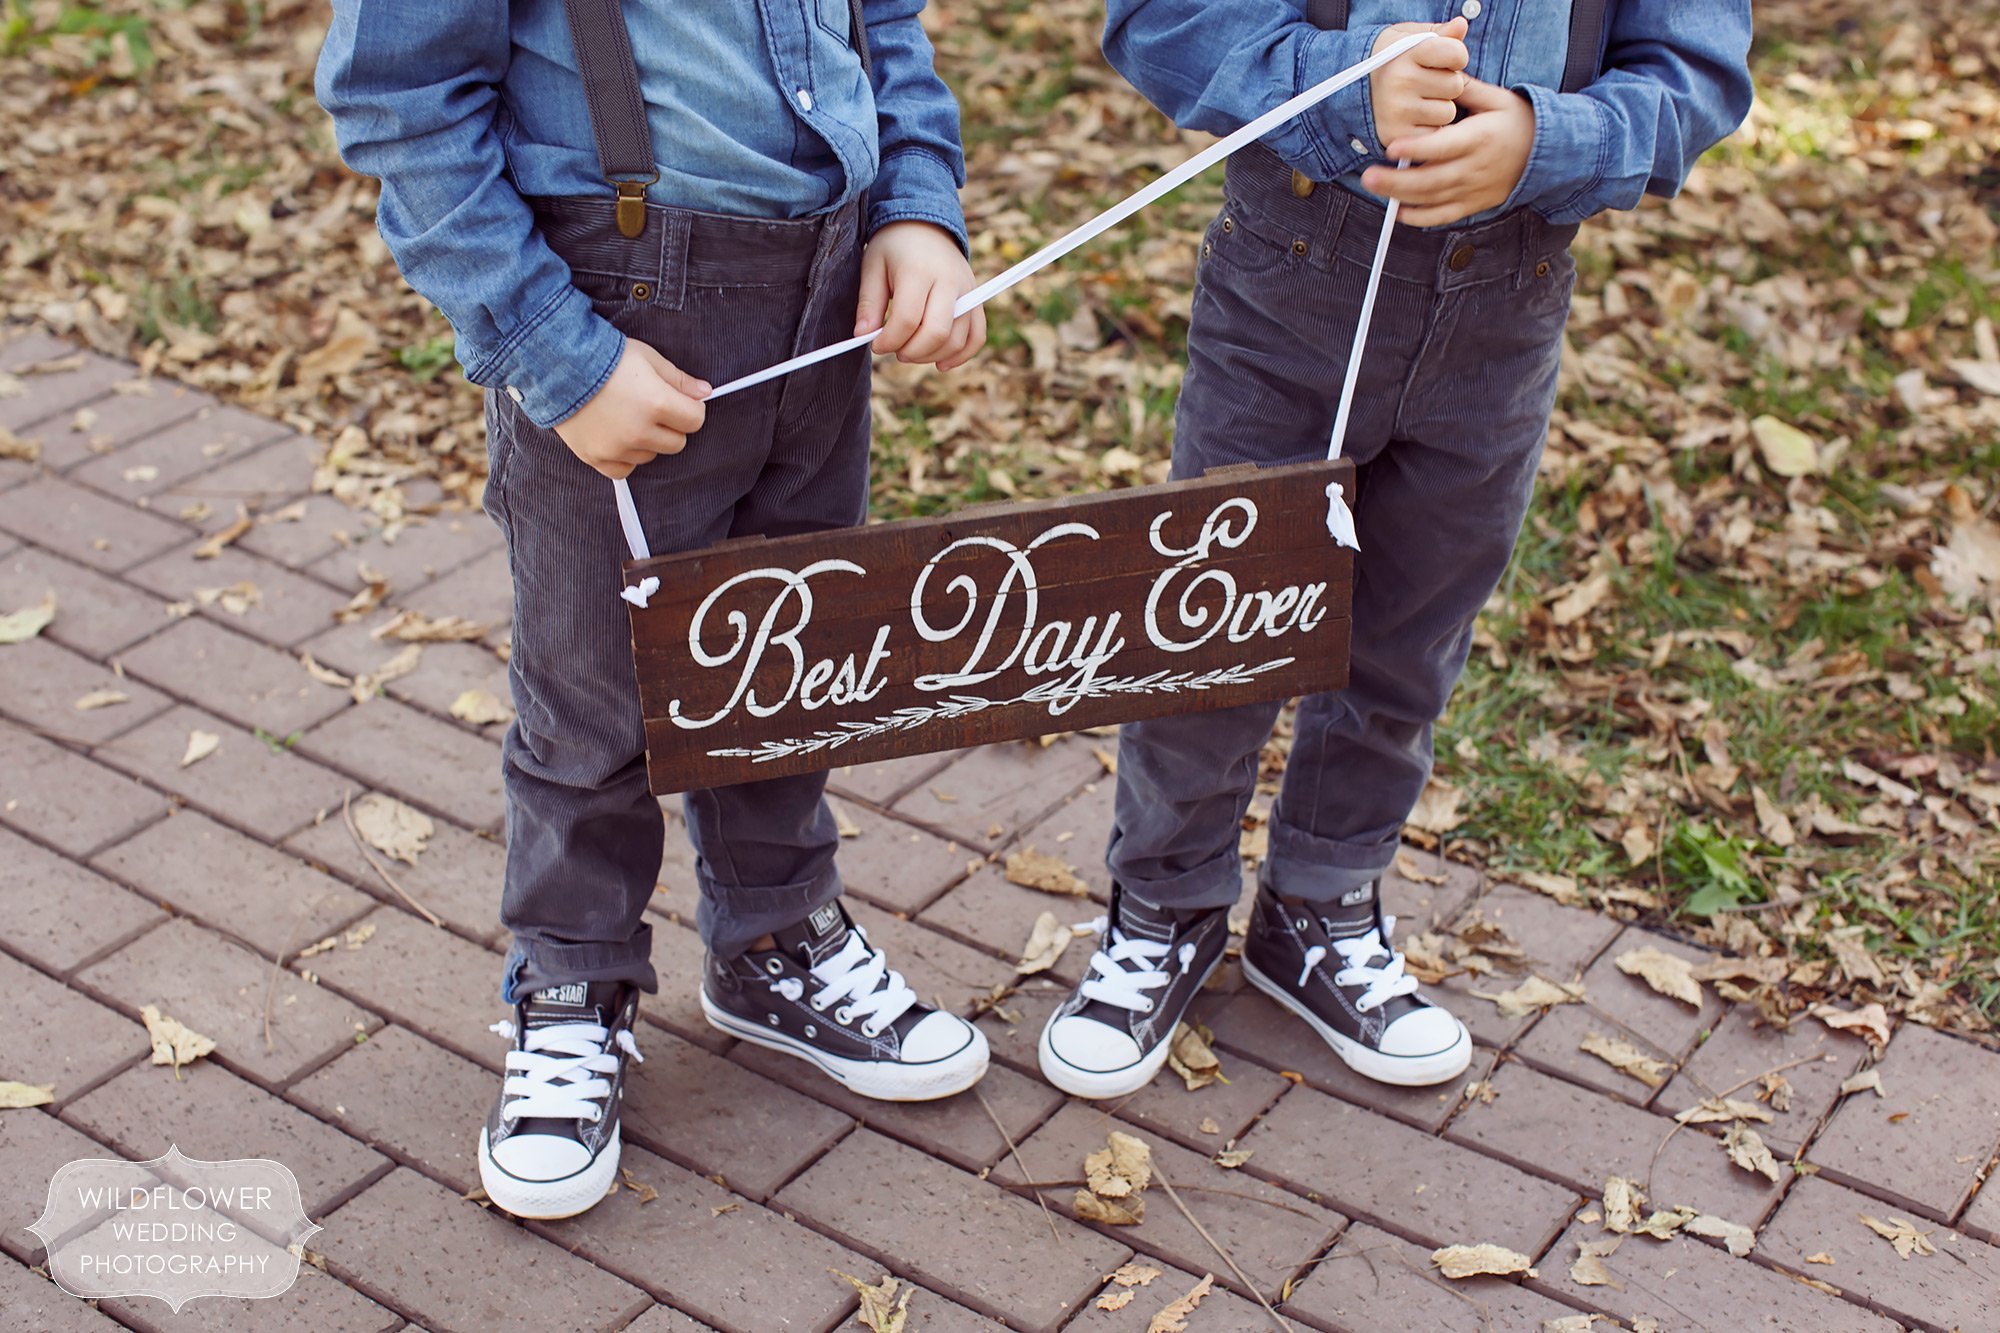 Twin ring bearers wearing converse shoes hold a wooden wedding sign with script font that reads, "Best Day Ever".